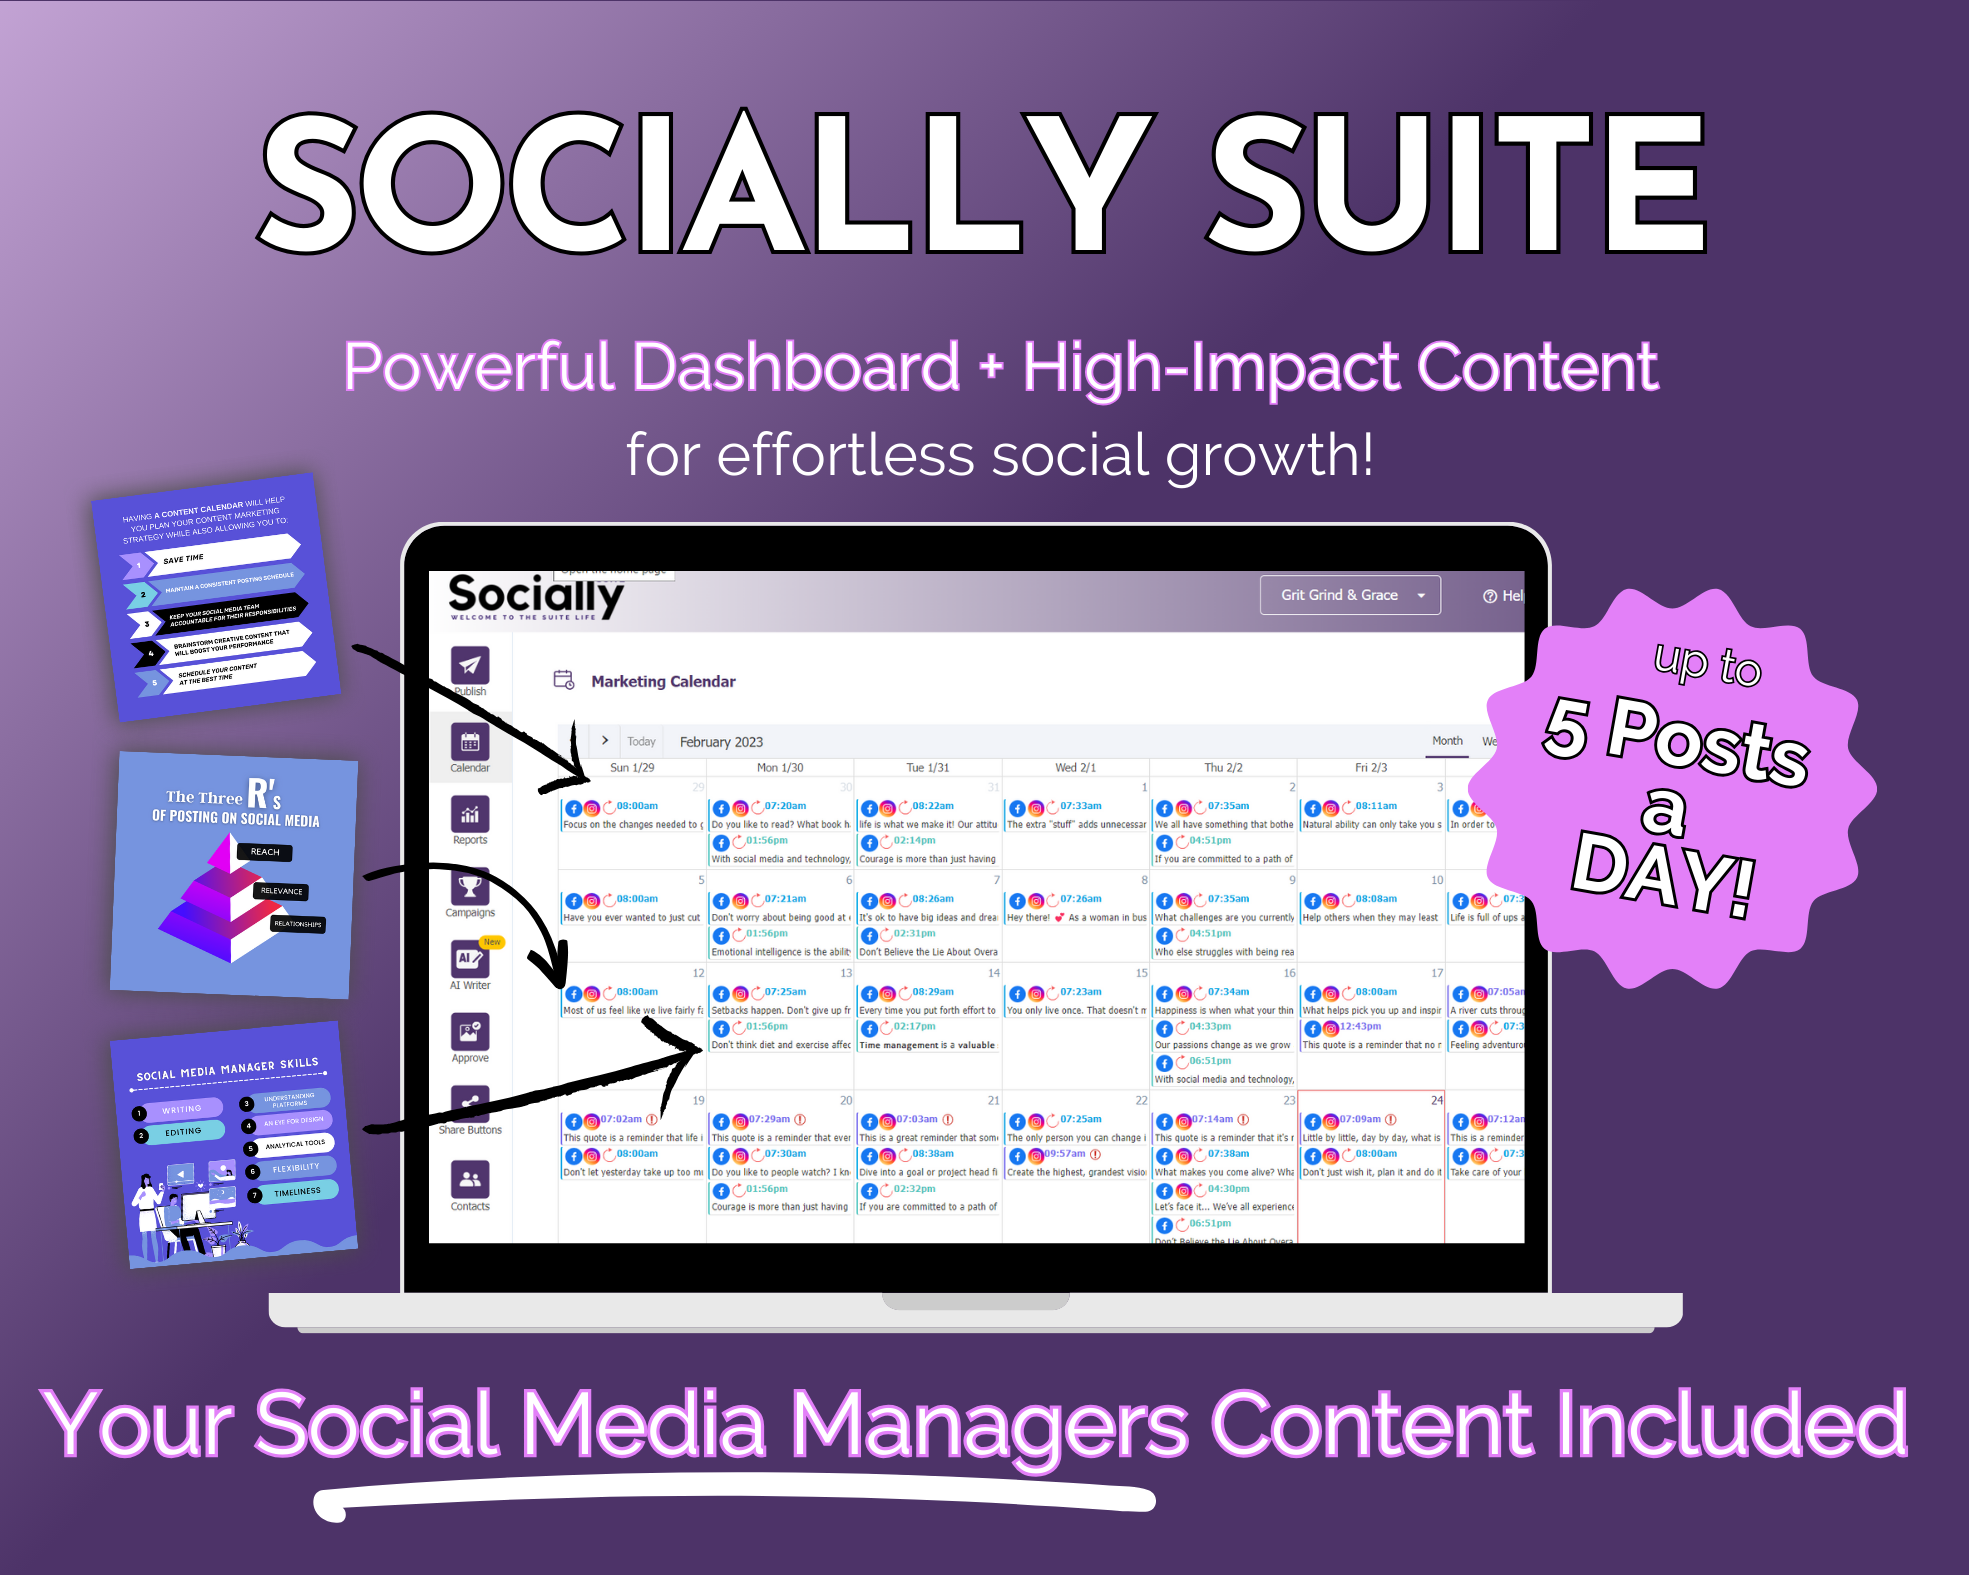 A promotional graphic for the "Get Socially Inclined Socially Suite Membership," highlighting features such as a powerful content dashboard and high-impact content for social media marketing growth, capable of managing up to 5 posts a day.